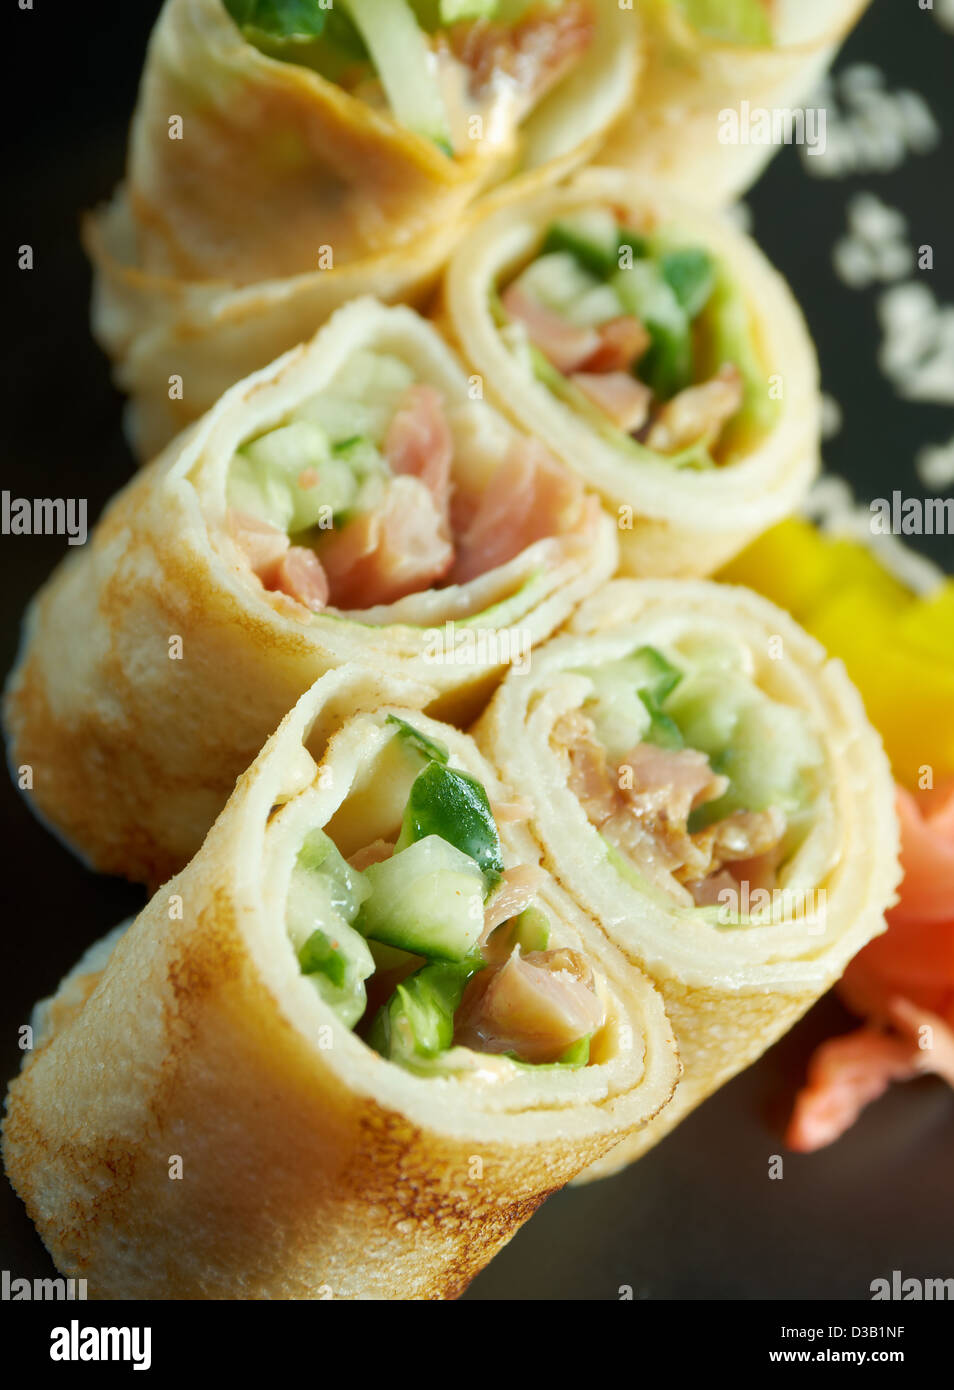 Chinese or Thai-style vegetable spring rolls  Stock Photo